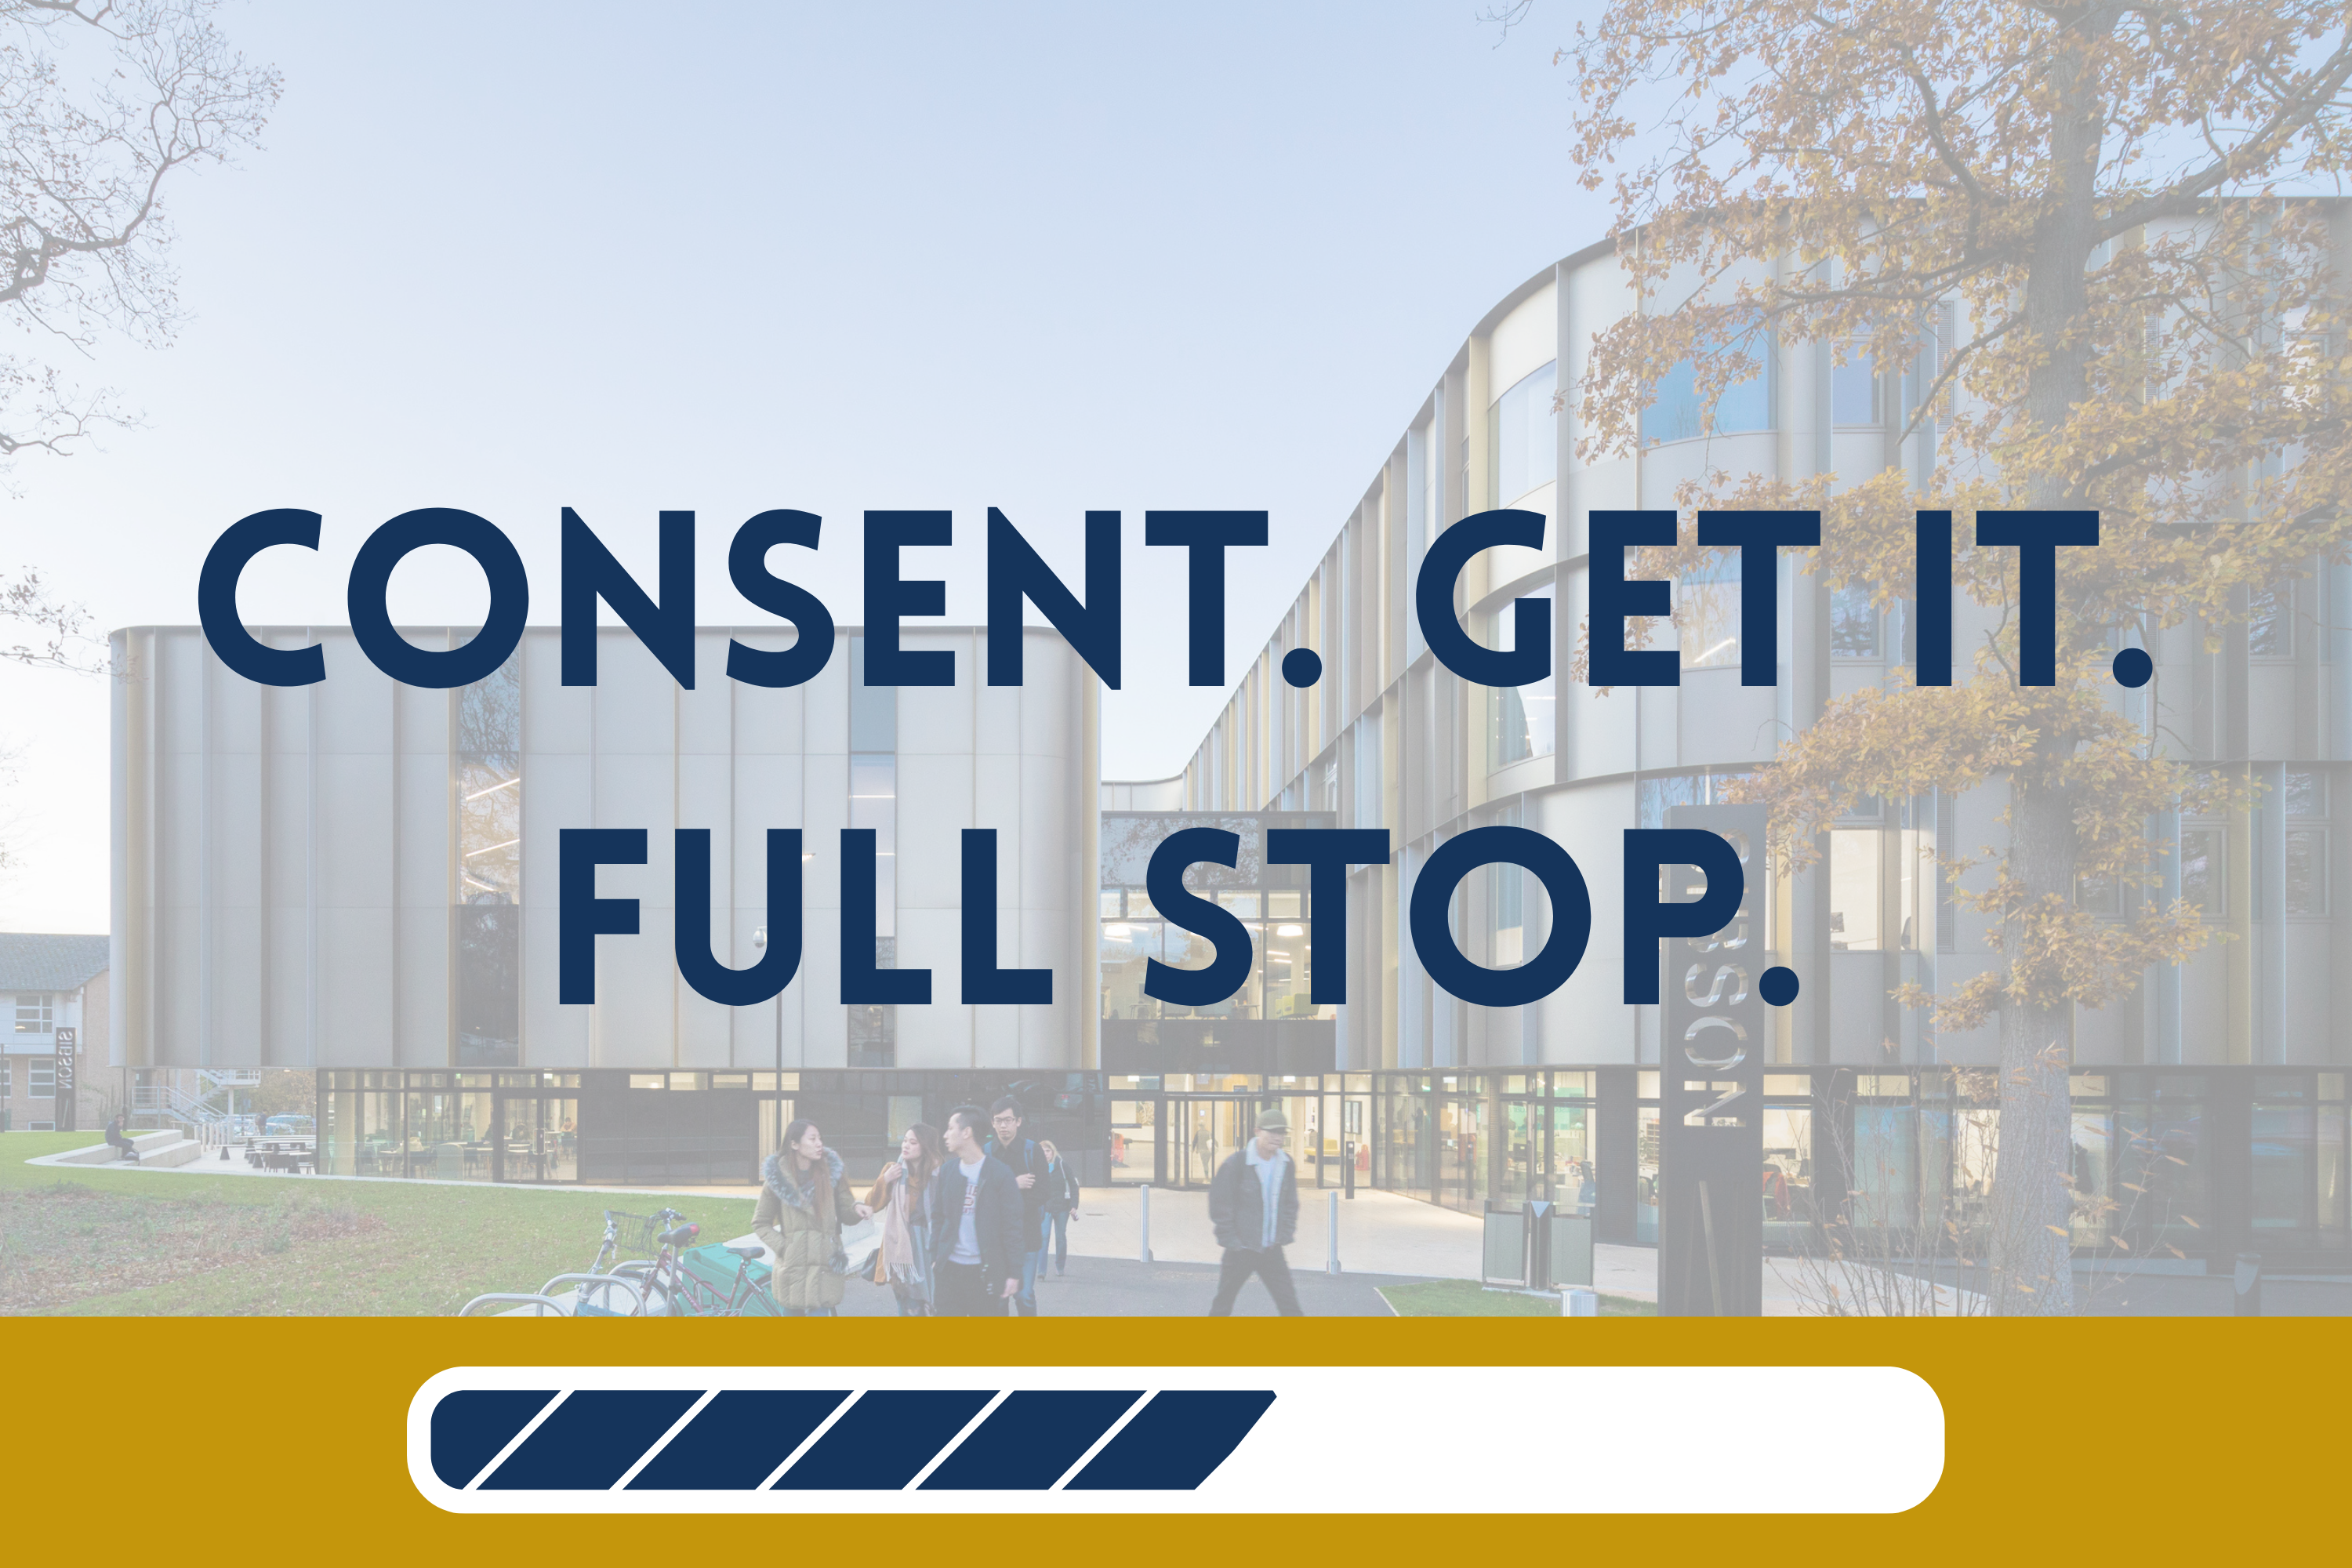 Consent. Get it. Full stop. with progress bar